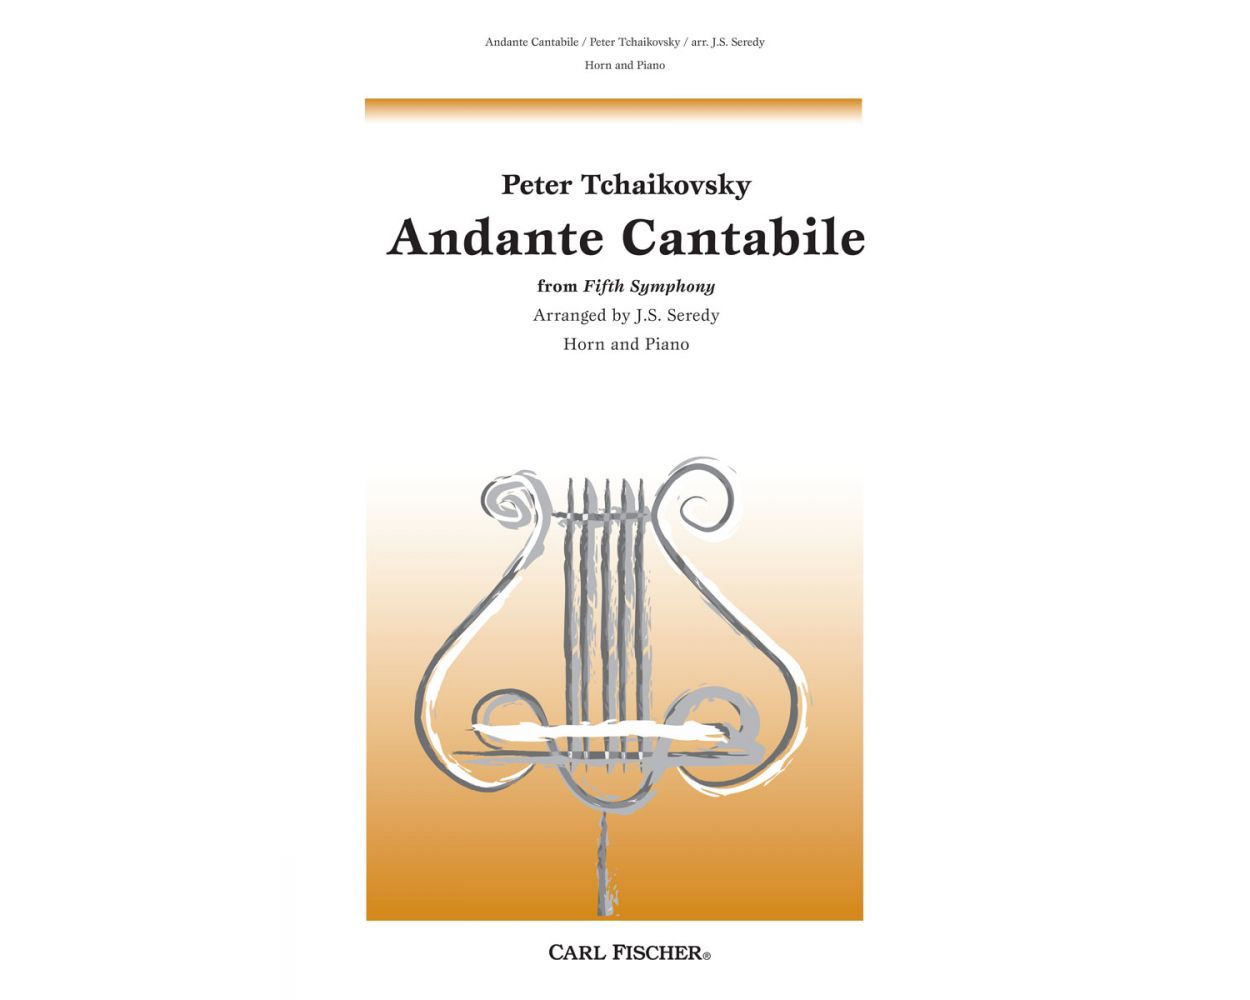 Tchaikovsky Andante Cantabile from Fifth Symphony